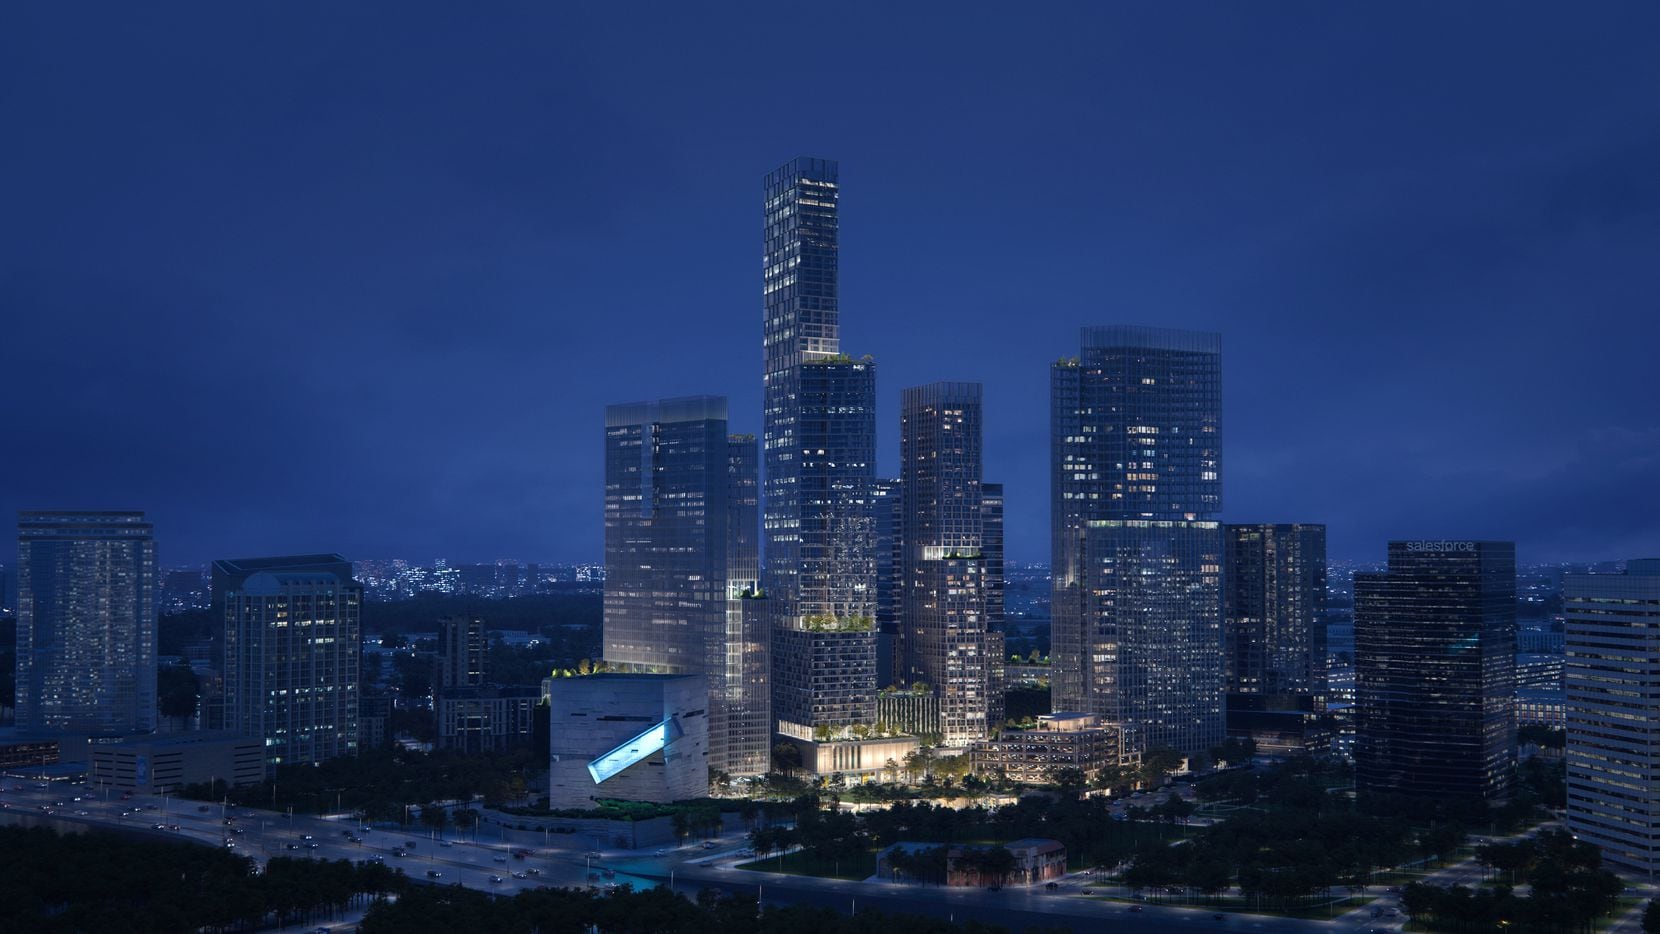 The planned North End redevelopment on the northwest edge of downtown Dallas will include four skyscrapers and a lush urban park.